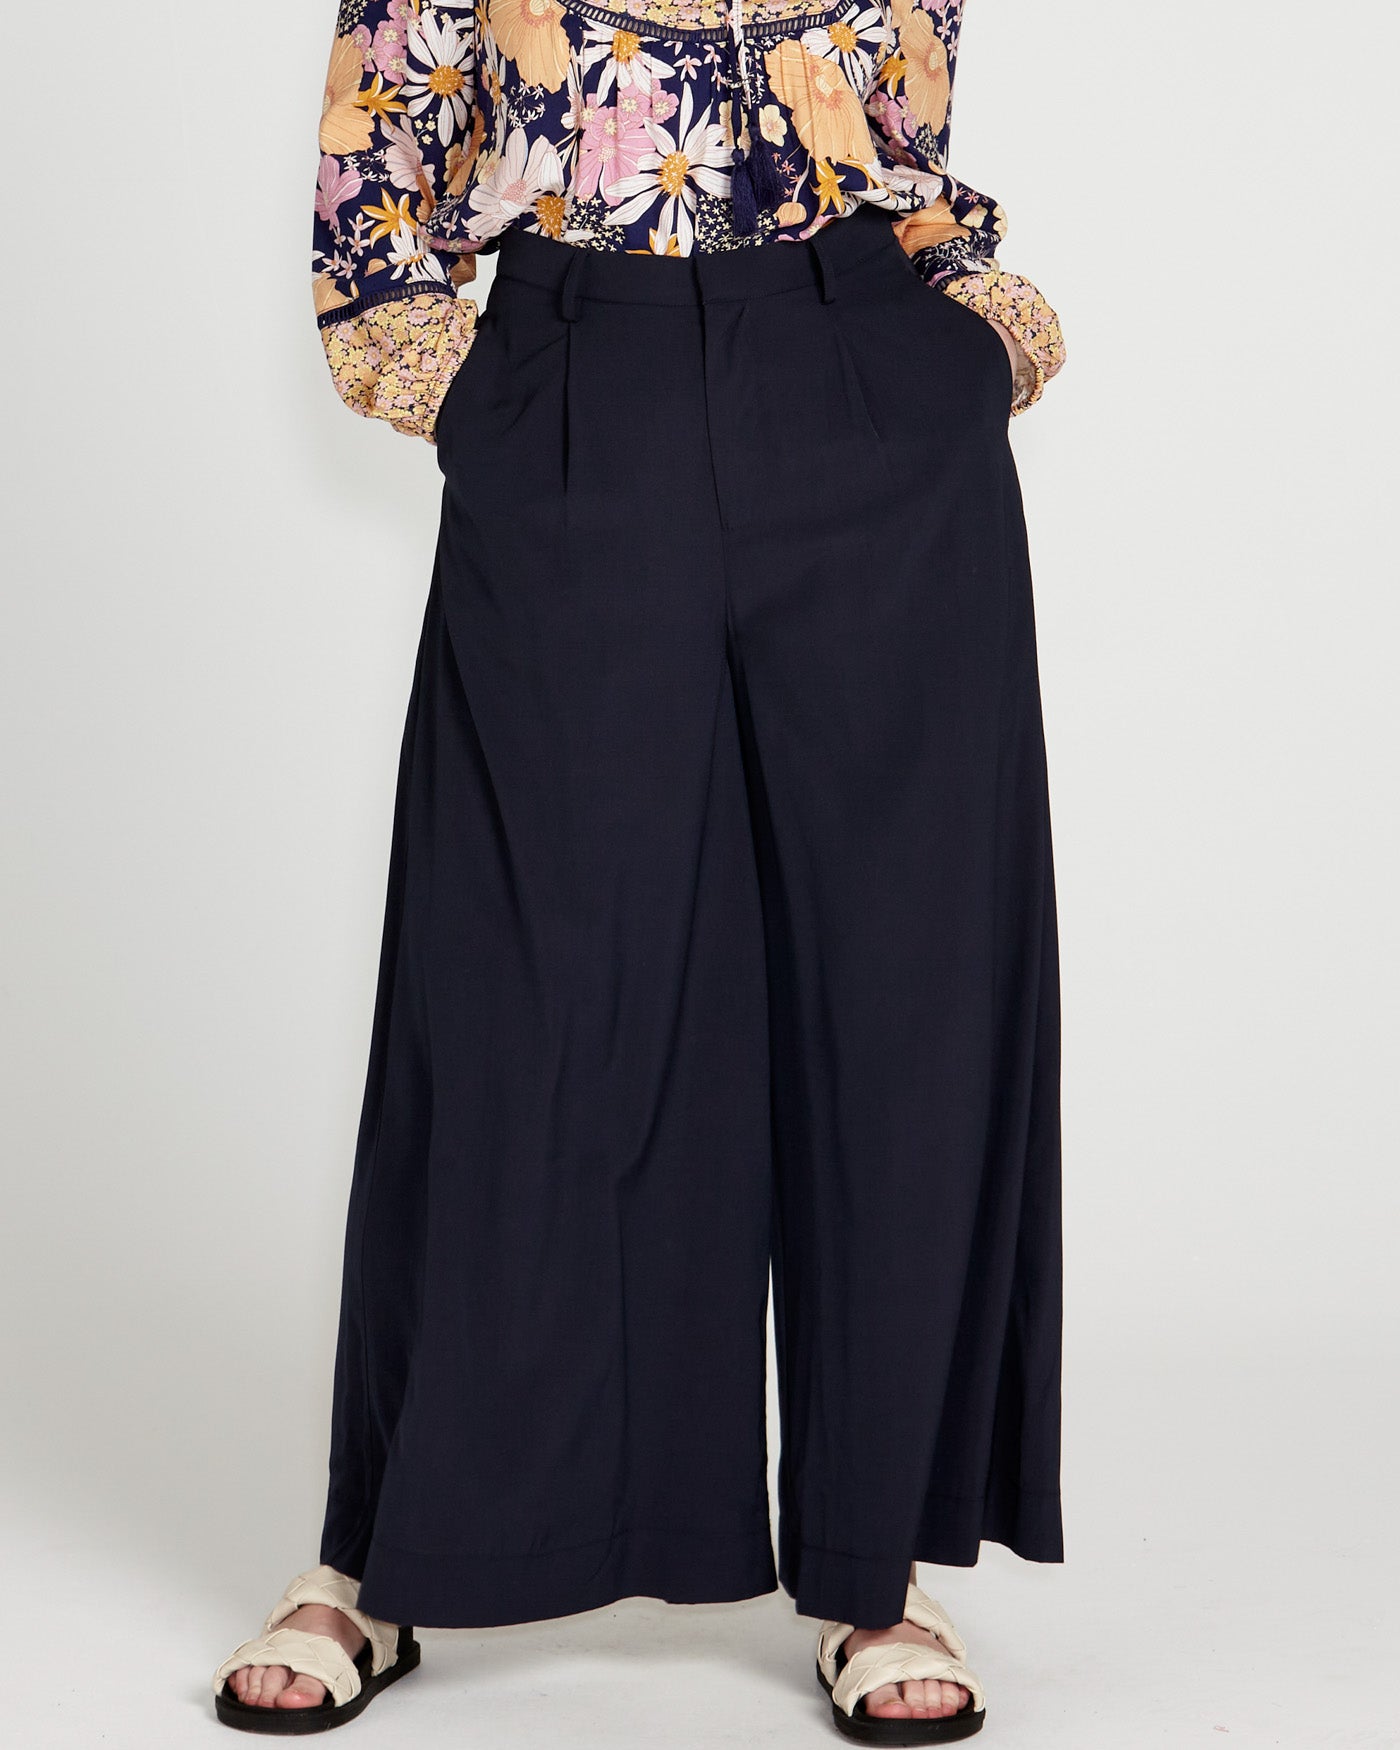 LASTINCH All Size's Solid Navy Blue Palazzo Pants